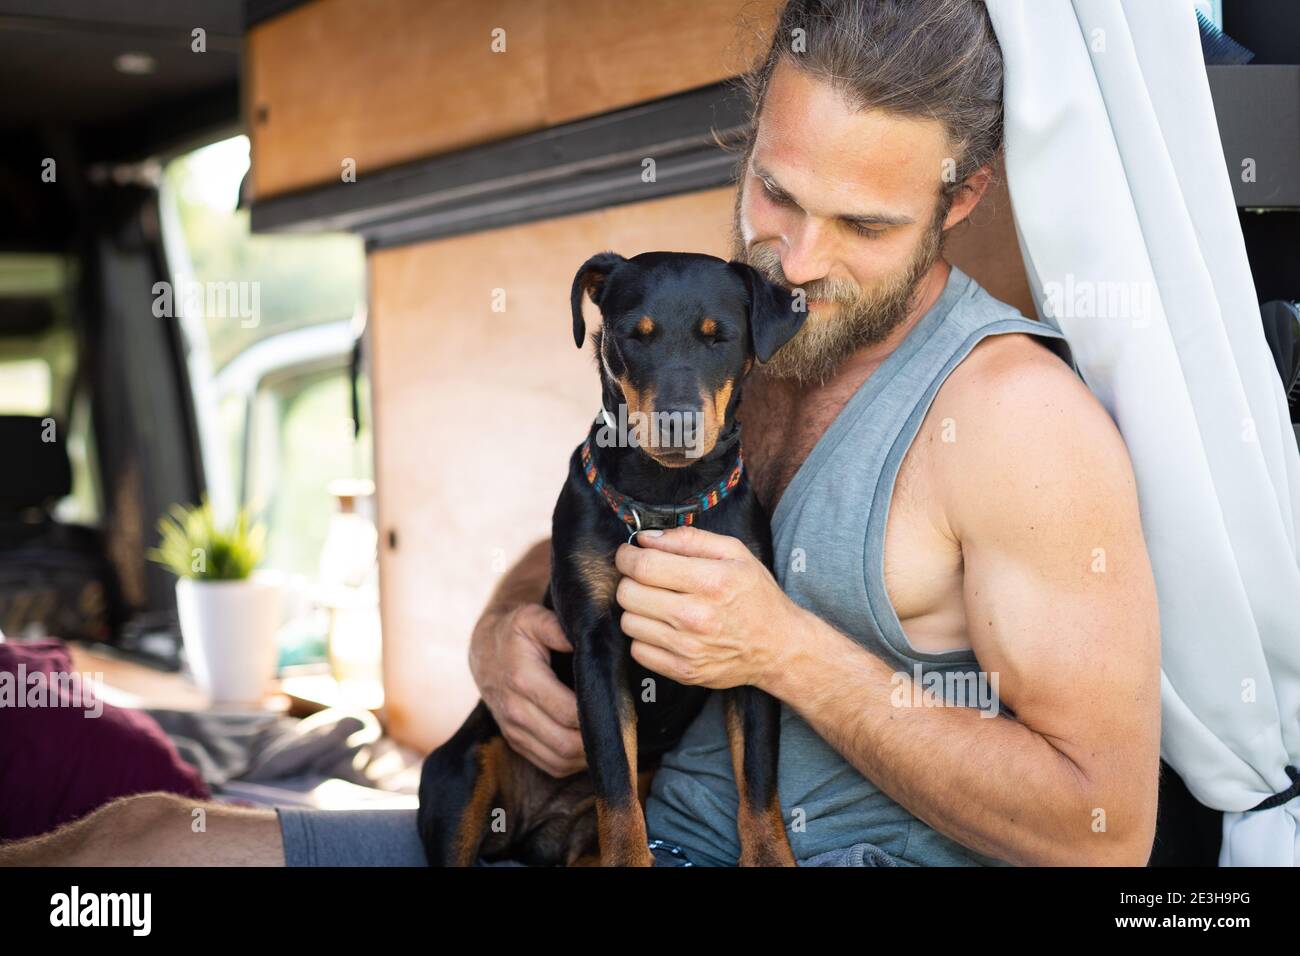 Man and his dog sitting in a camper van Stock Photo